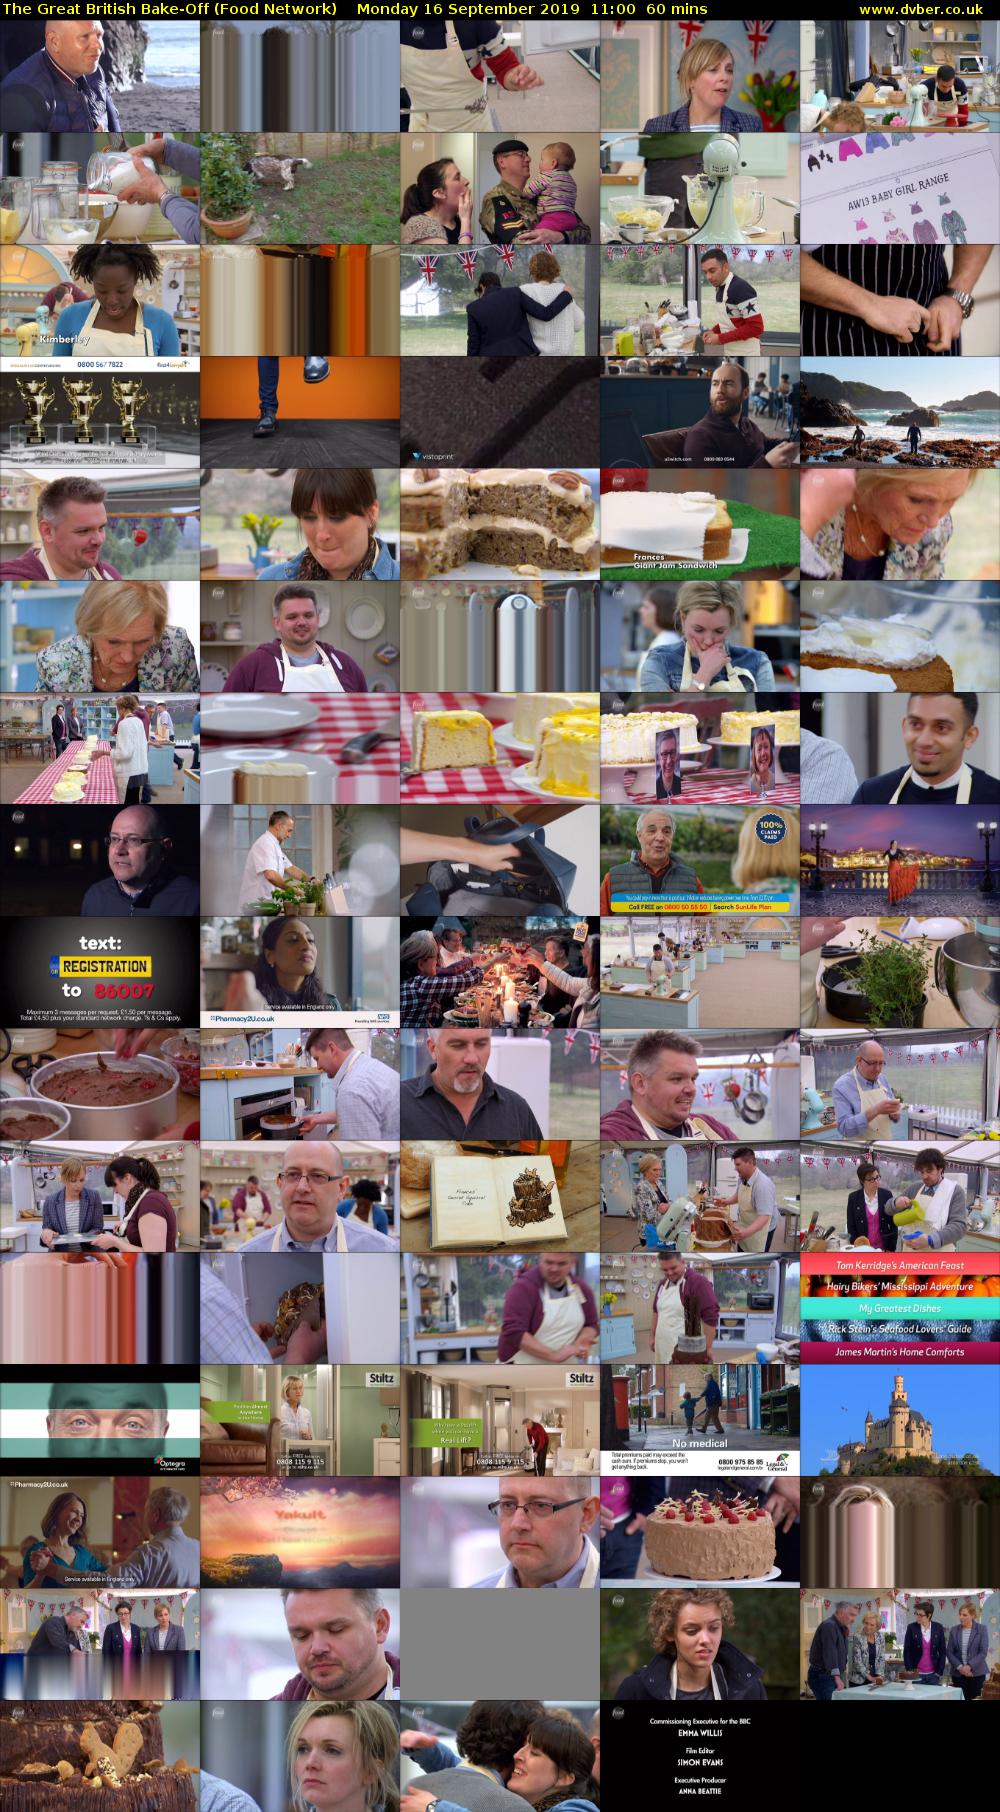 The Great British Bake-Off (Food Network) Monday 16 September 2019 11:00 - 12:00